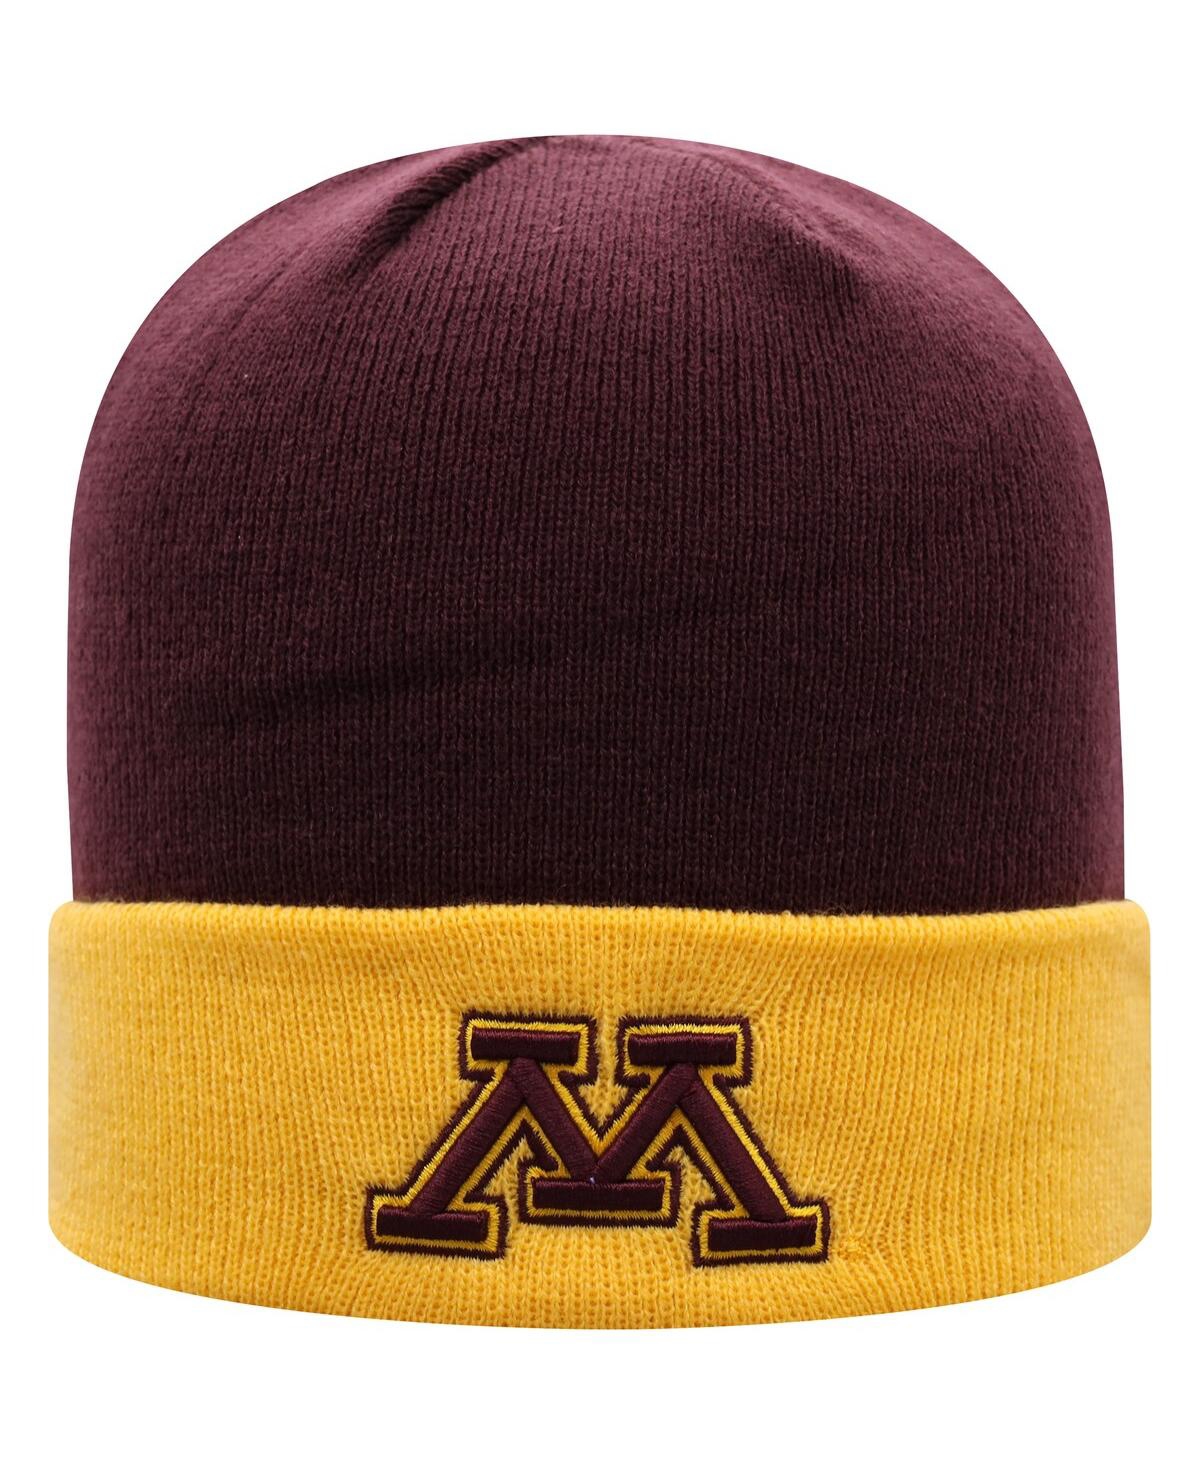 Top Of The World Men's Maroon And Gold Minnesota Golden Gophers Core 2-tone Cuffed Knit Hat In Maroon,gold